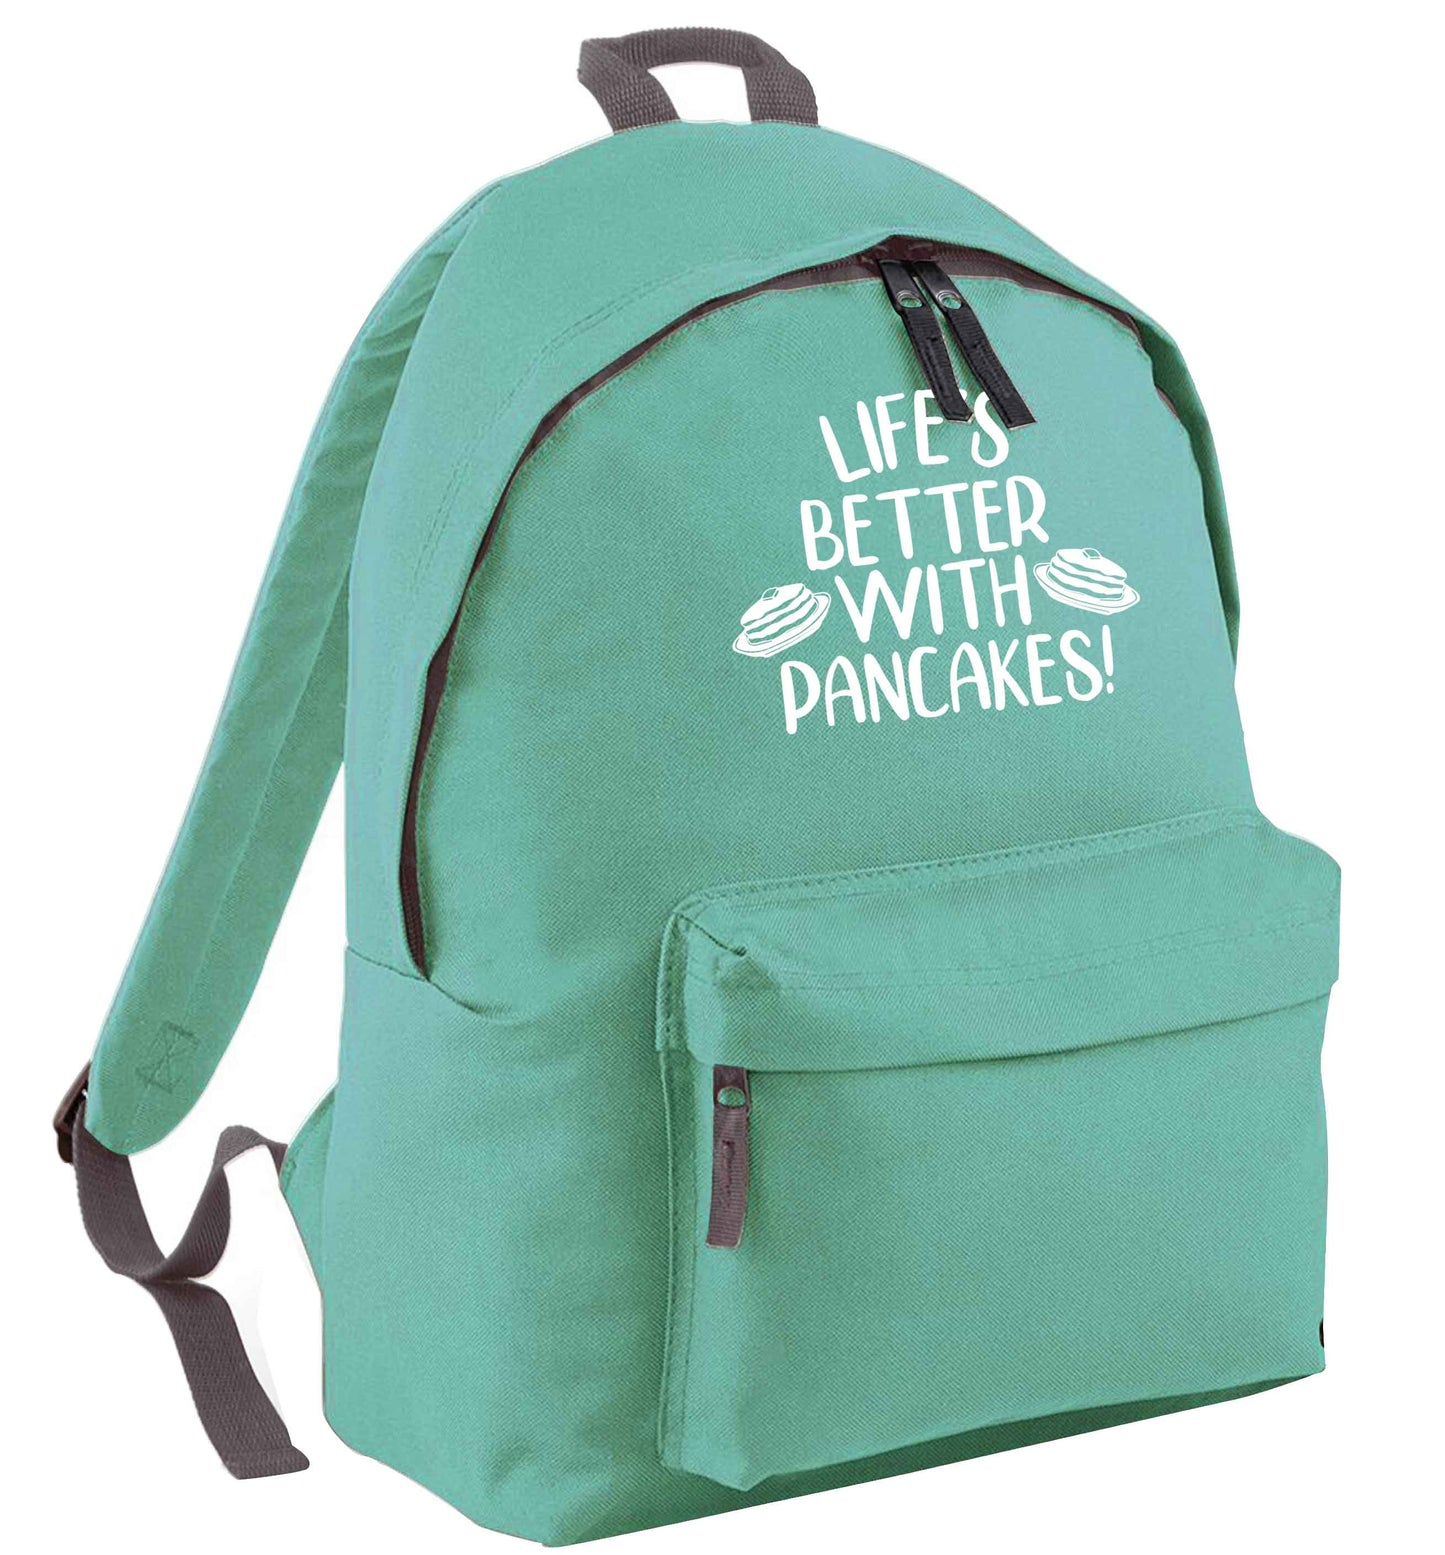 Life's better with pancakes mint adults backpack